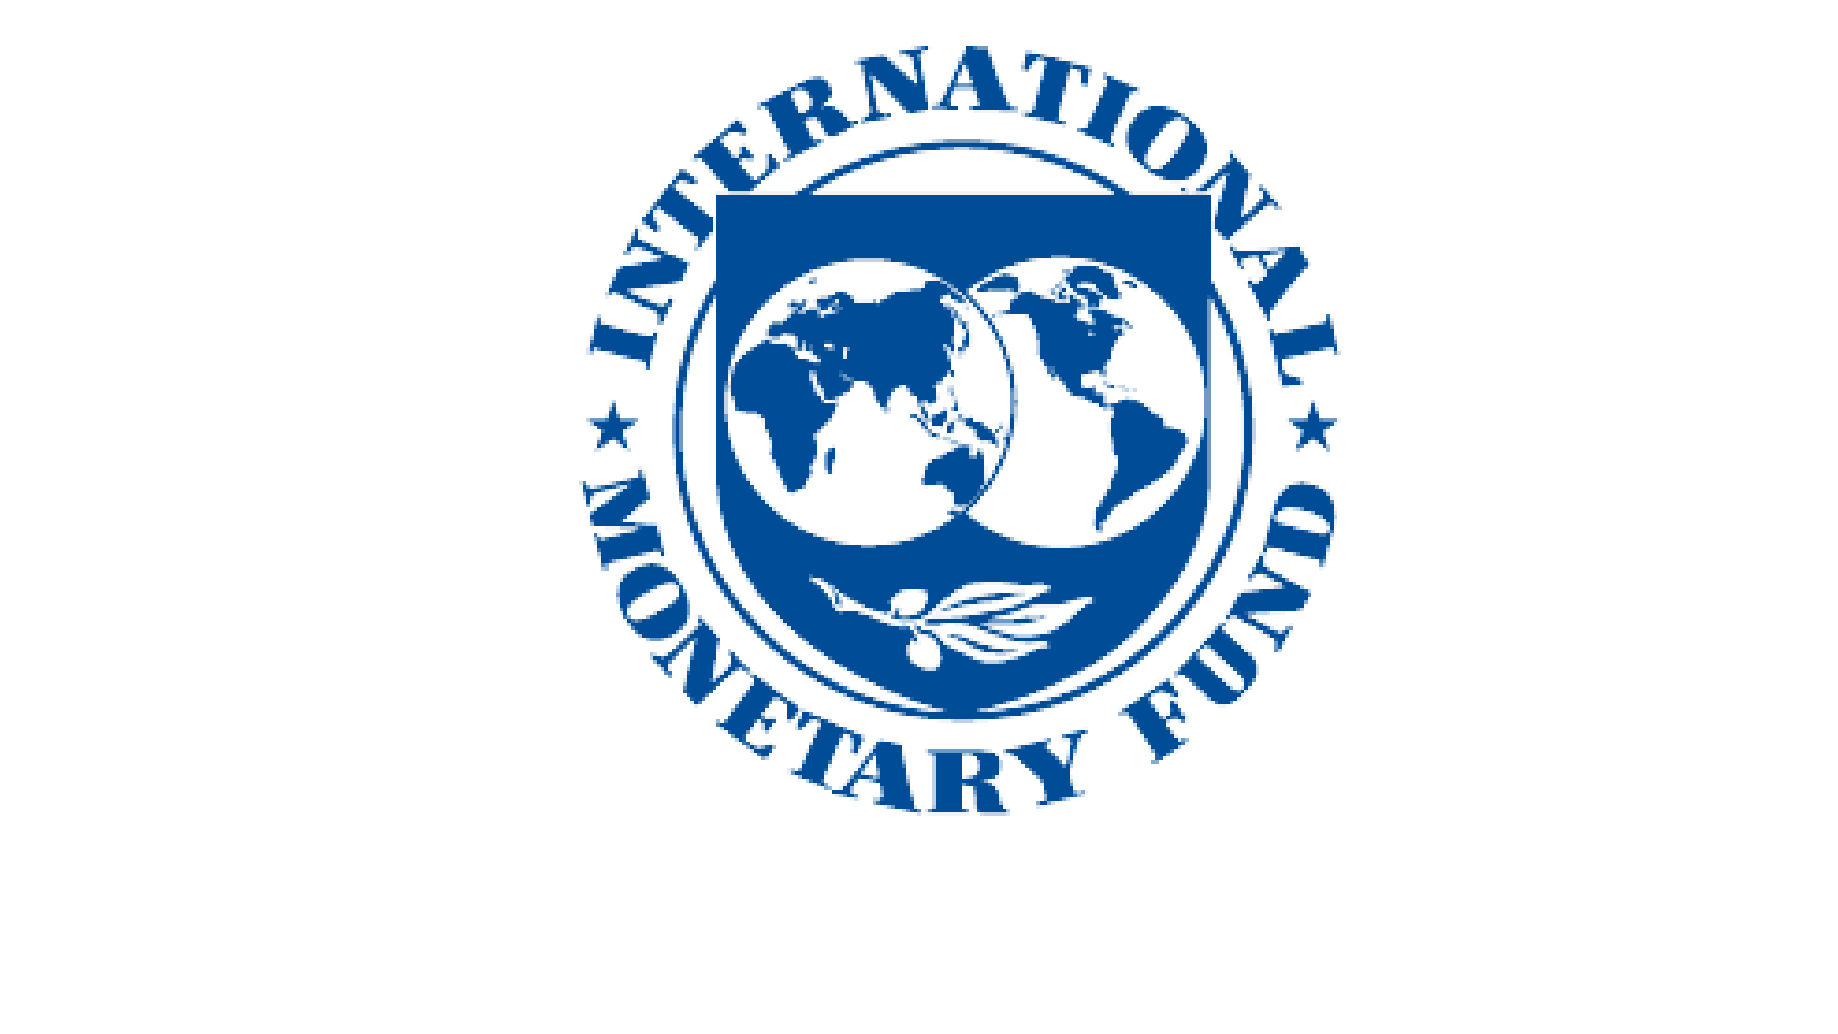 Email accounts of International Monetary Fund compromised